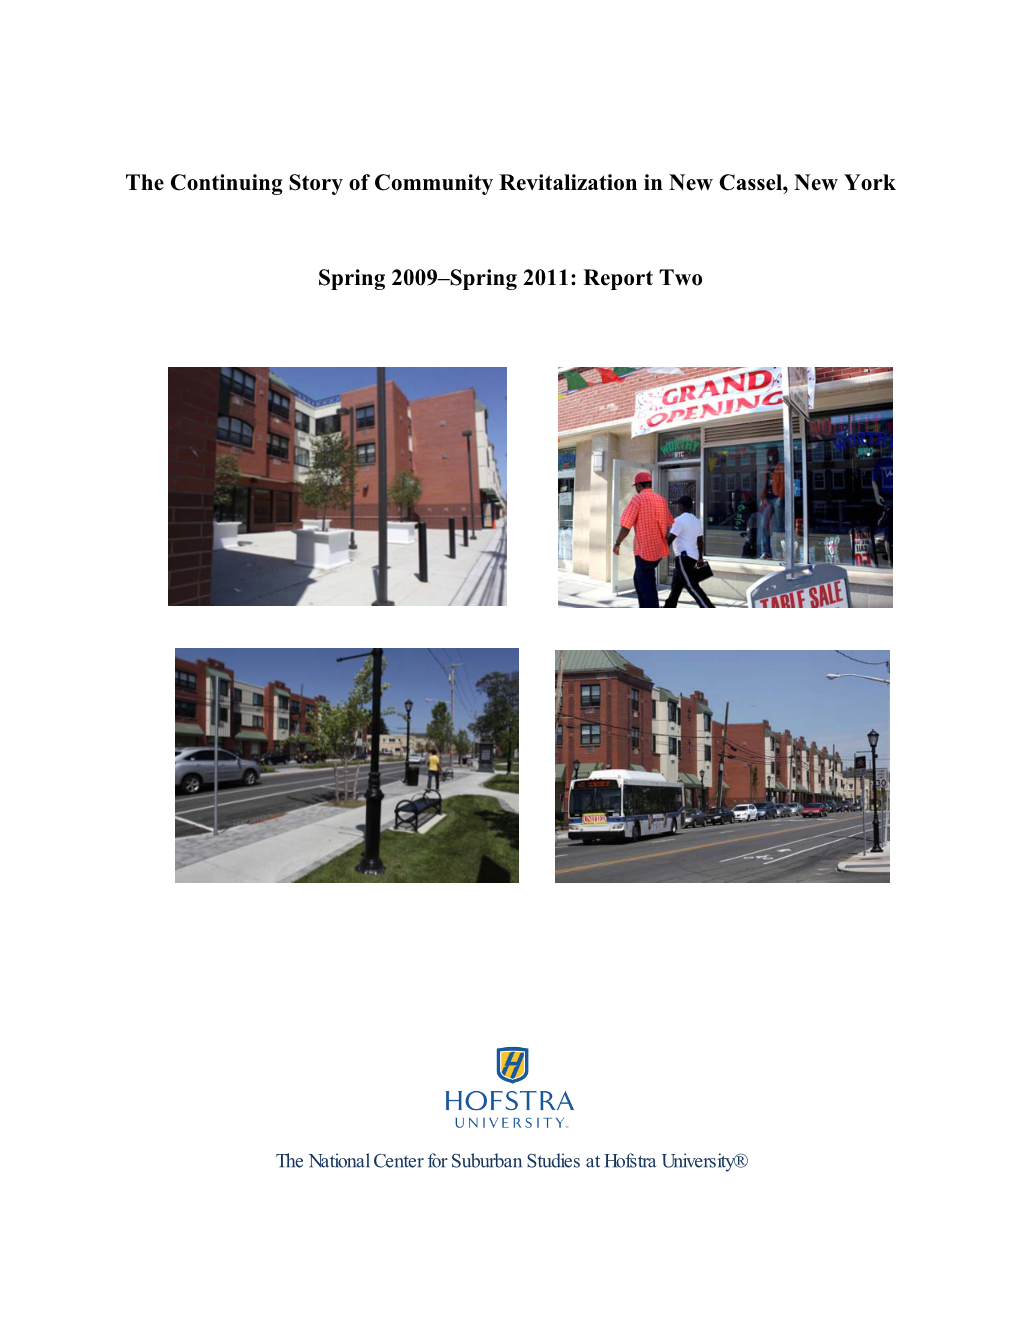 The Continuing Story of Community Revitalization in New Cassel, New York